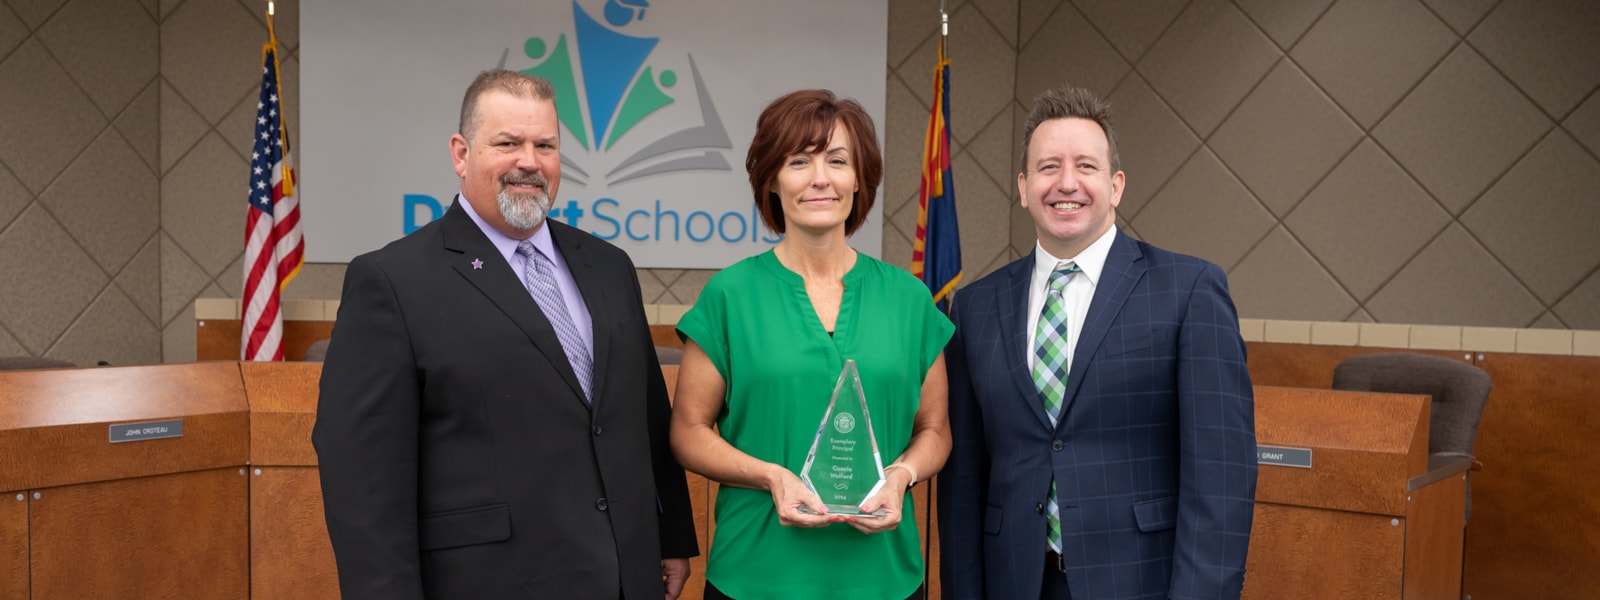 Connie Wolford received the Maricopa County Exemplary Principal award